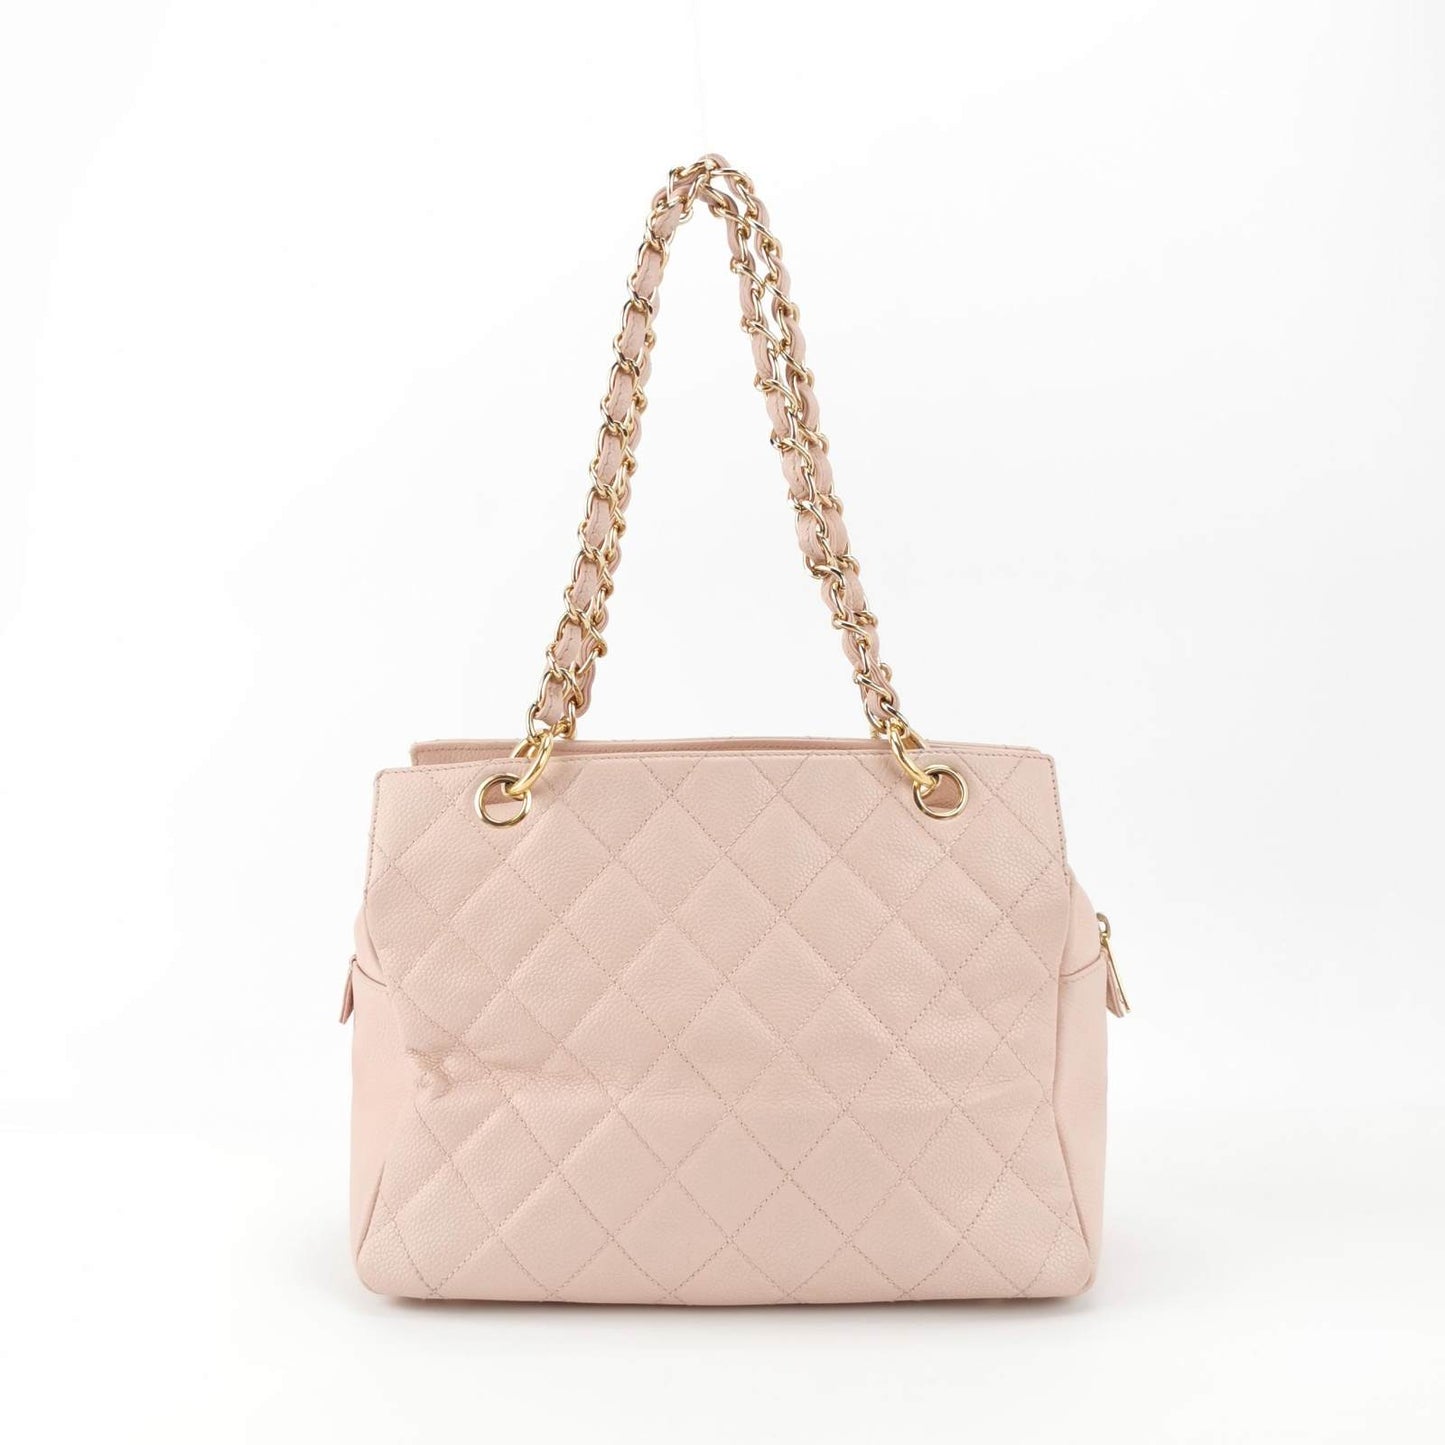 Chanel PST Petite Shopping Tote Pale Pink Caviar Leather Chain Bag